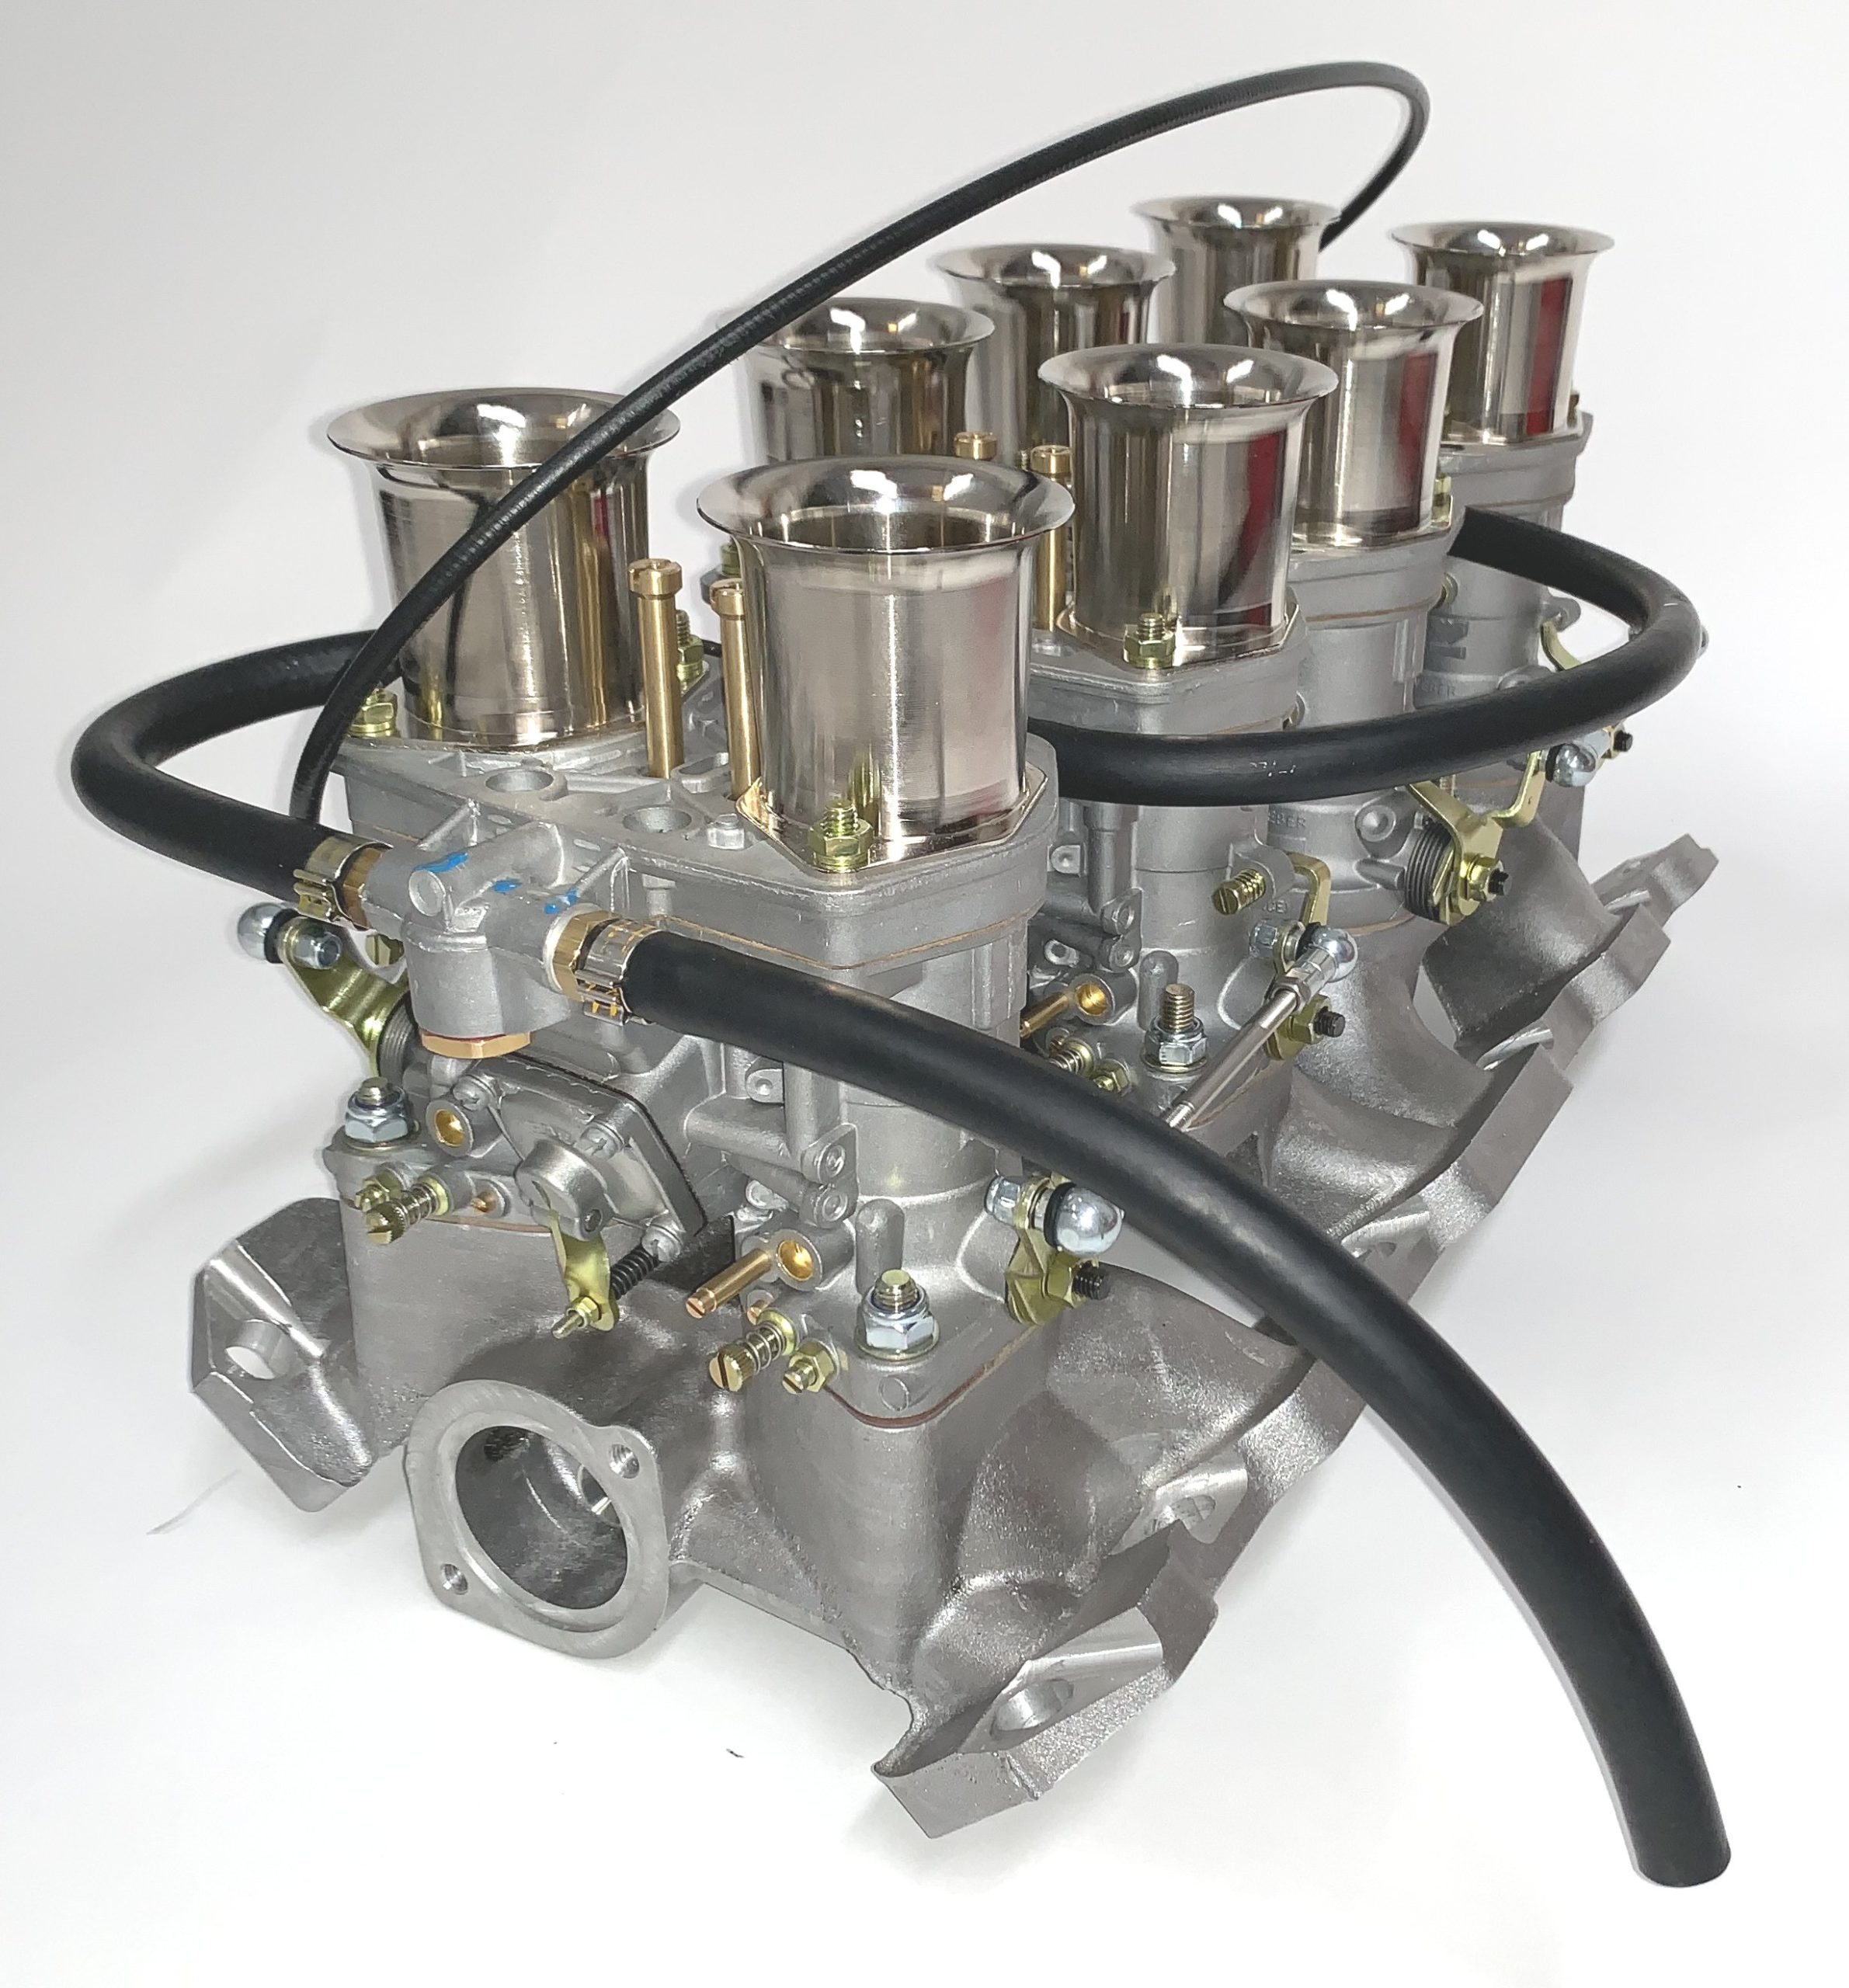 https://lorrtec-racing-parts.com/wp-content/uploads/a/kitcarburateur-ROVER-V8-scaled.jpg